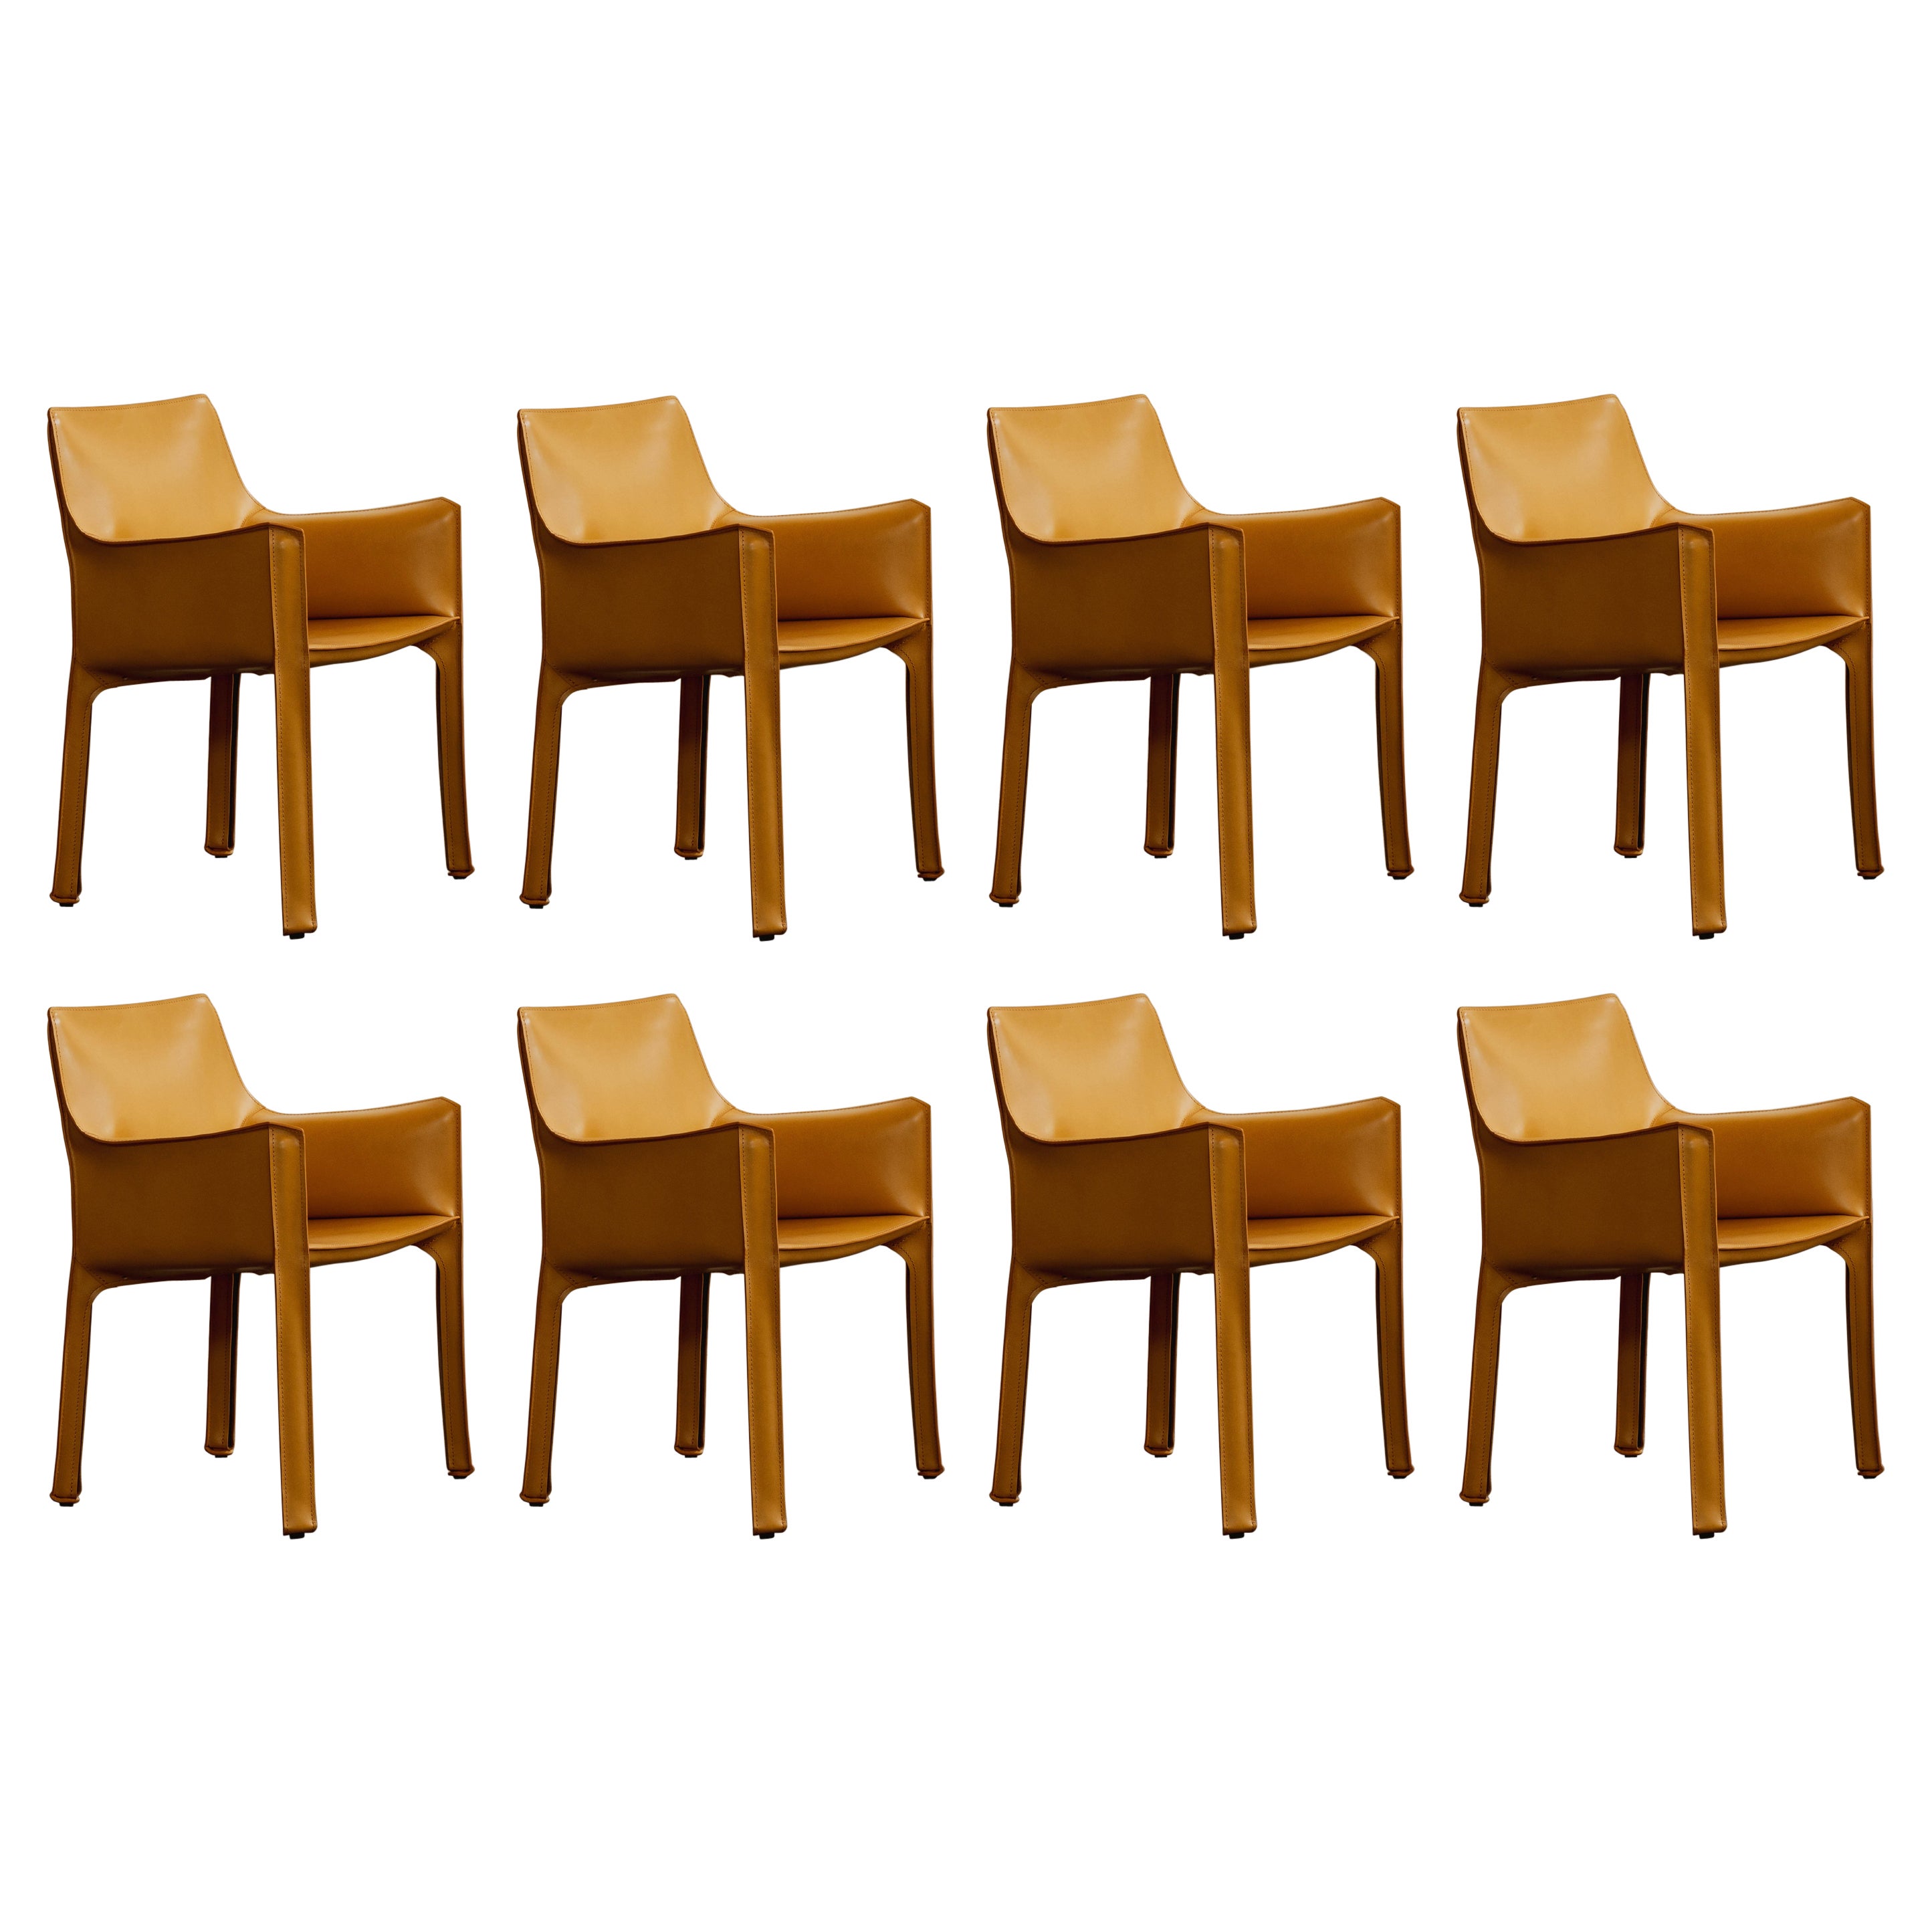 Mario Bellini "CAB 413" Chairs for Cassina in Yellow, 1977, Set of 8 For Sale